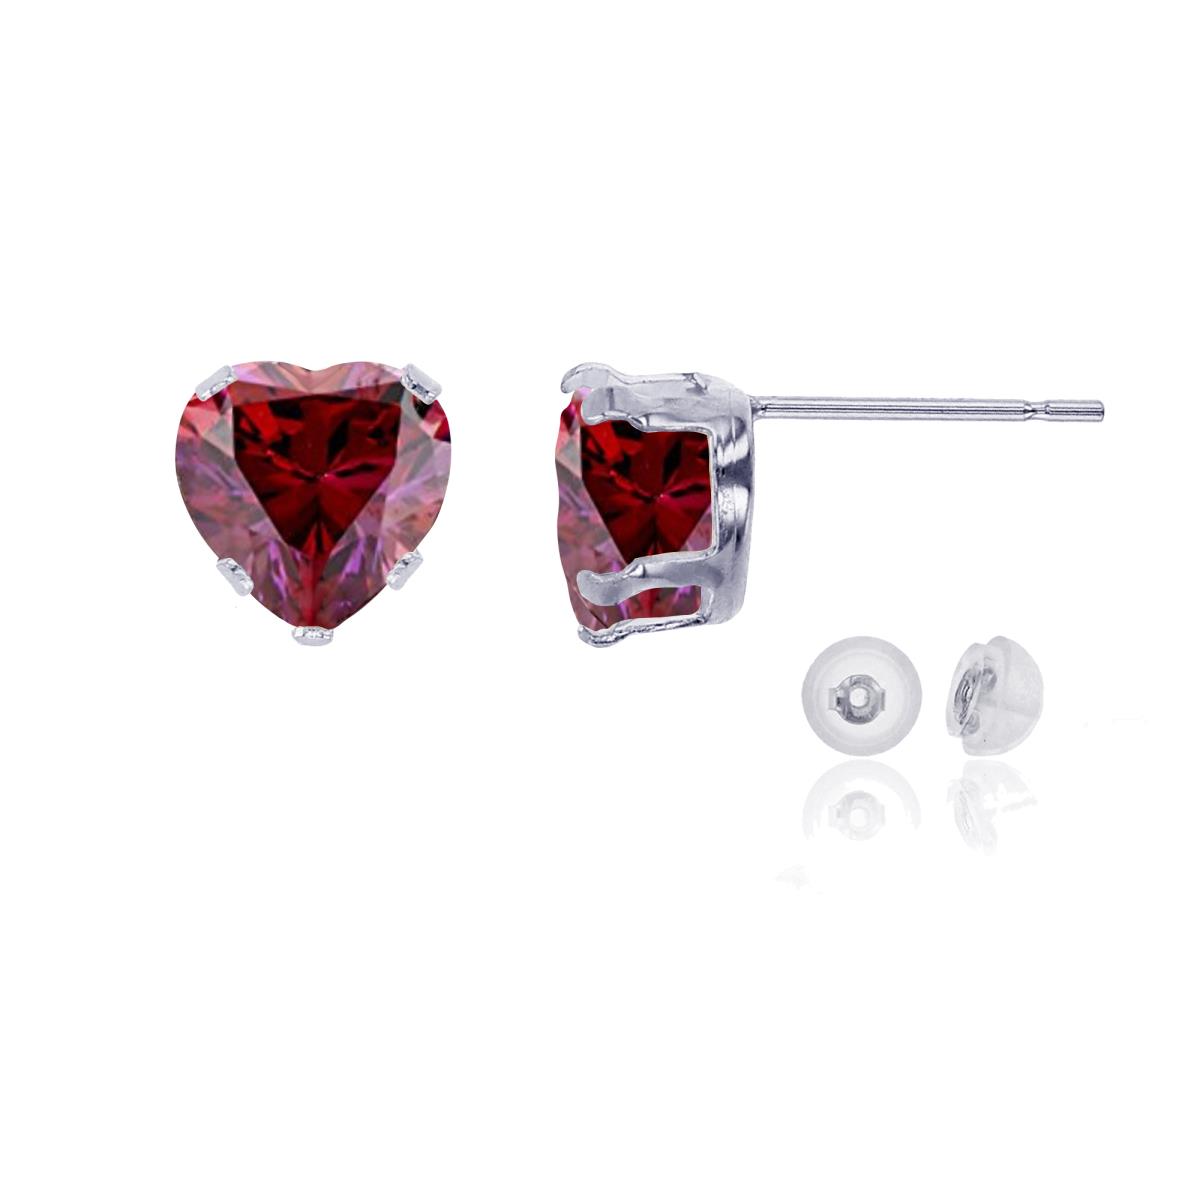 10K White Gold 6x6mm Heart Cr Ruby Stud Earring with Silicone Back